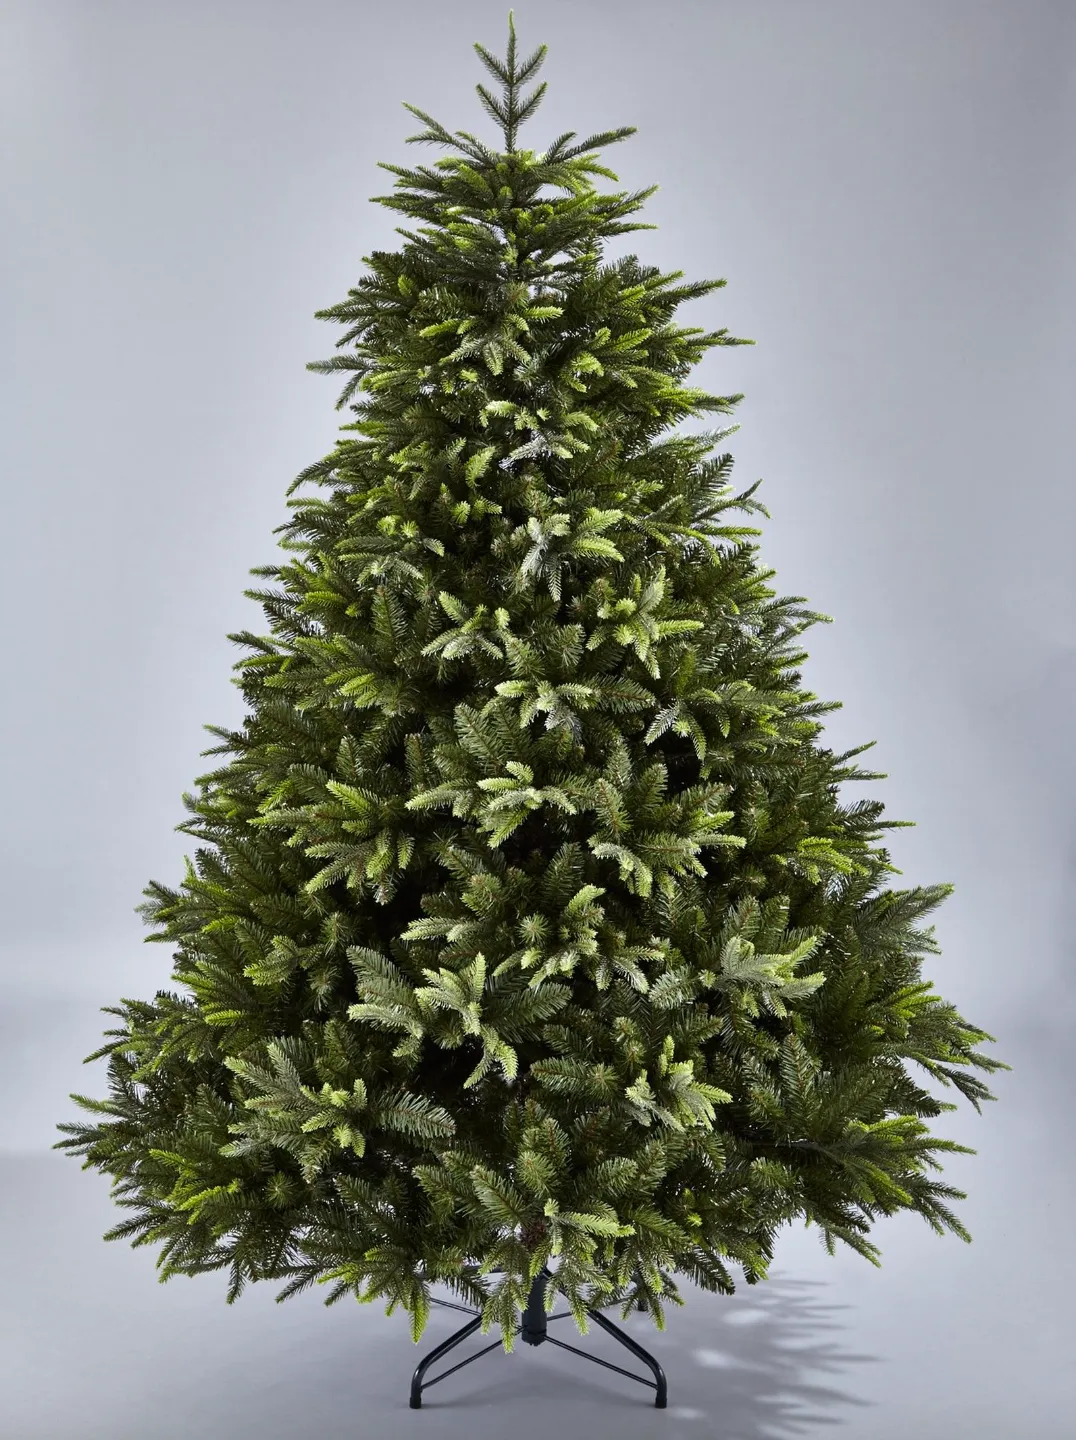 6ft Sherwood Real Look Full Christmas Tree - was £189.99 now £139.99 (save £50)